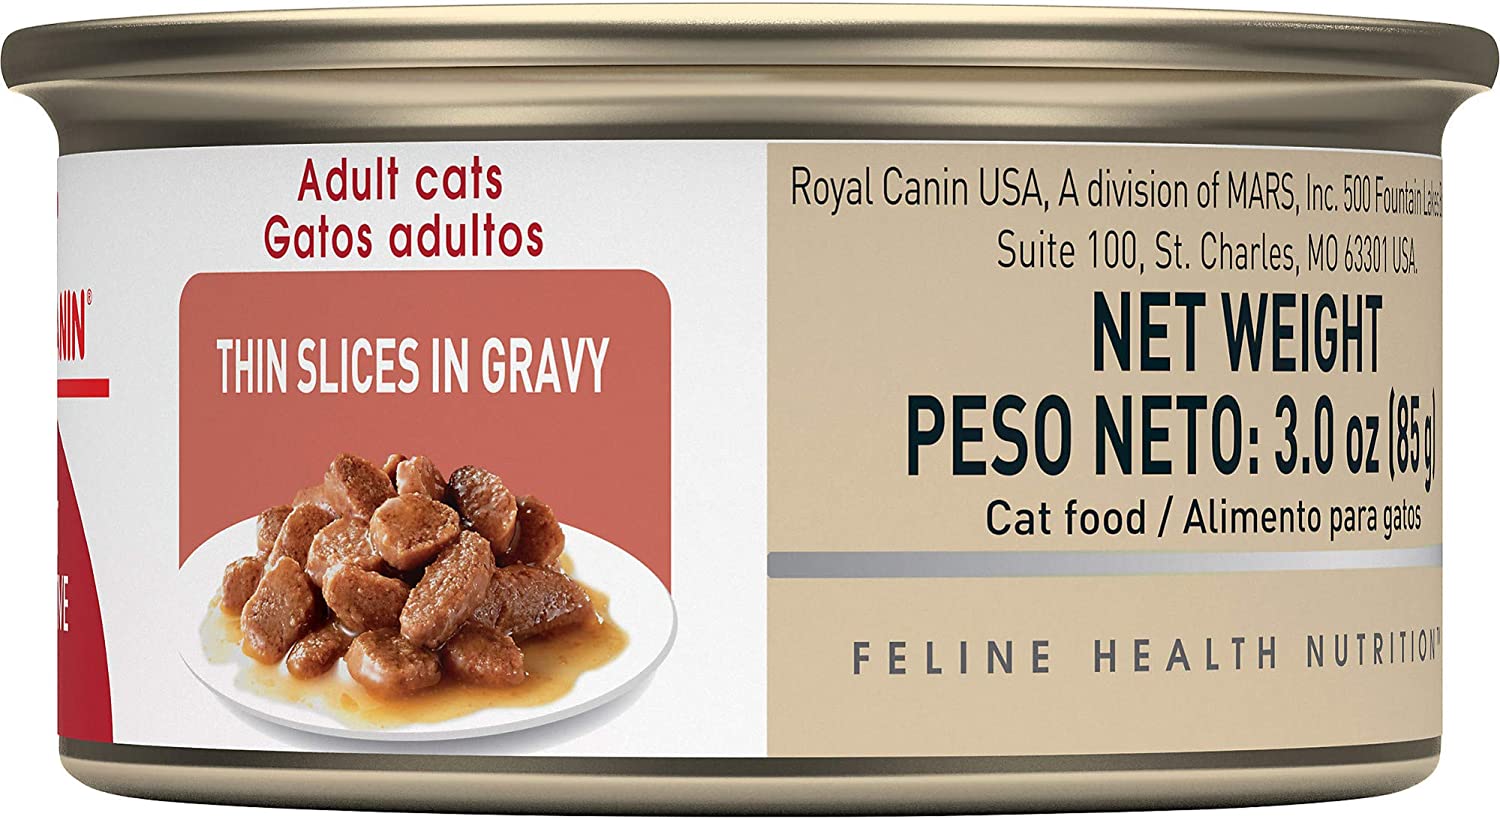 Royal Canin Feline Health Nutrition Adult Instinctive Thin Slices in Gravy Canned Cat Food, 3 oz can